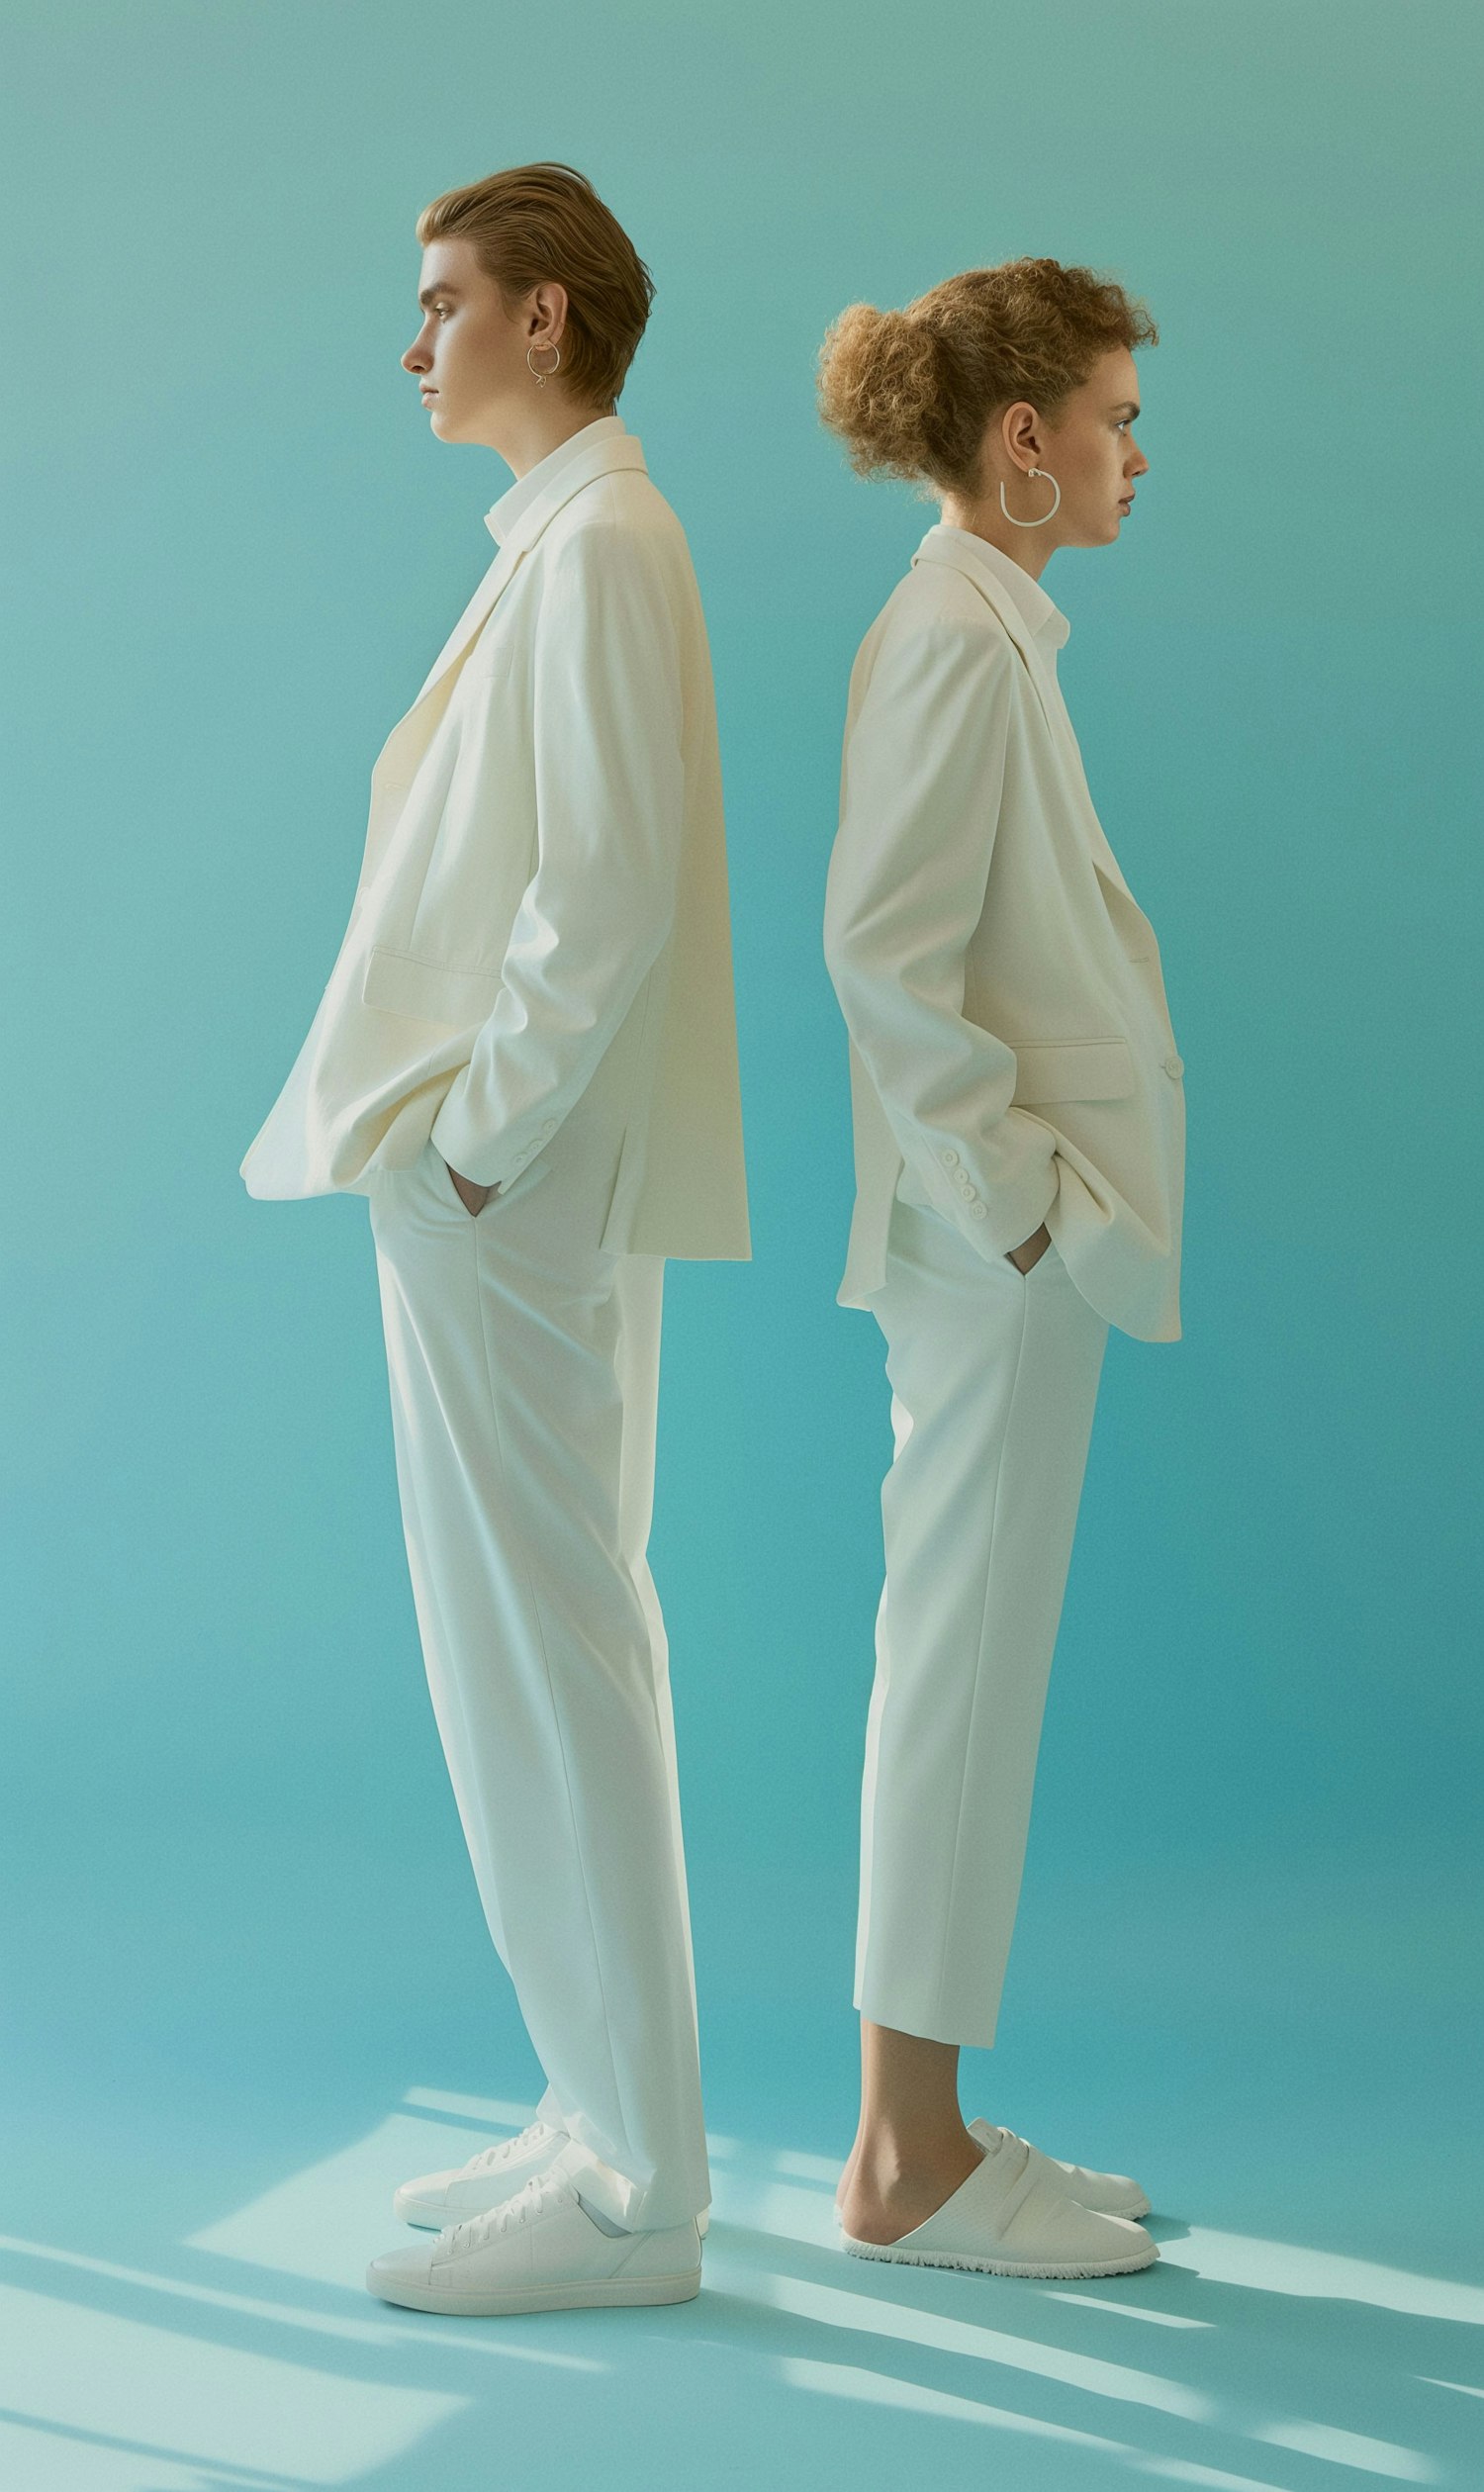 Back-to-Back in White Suits